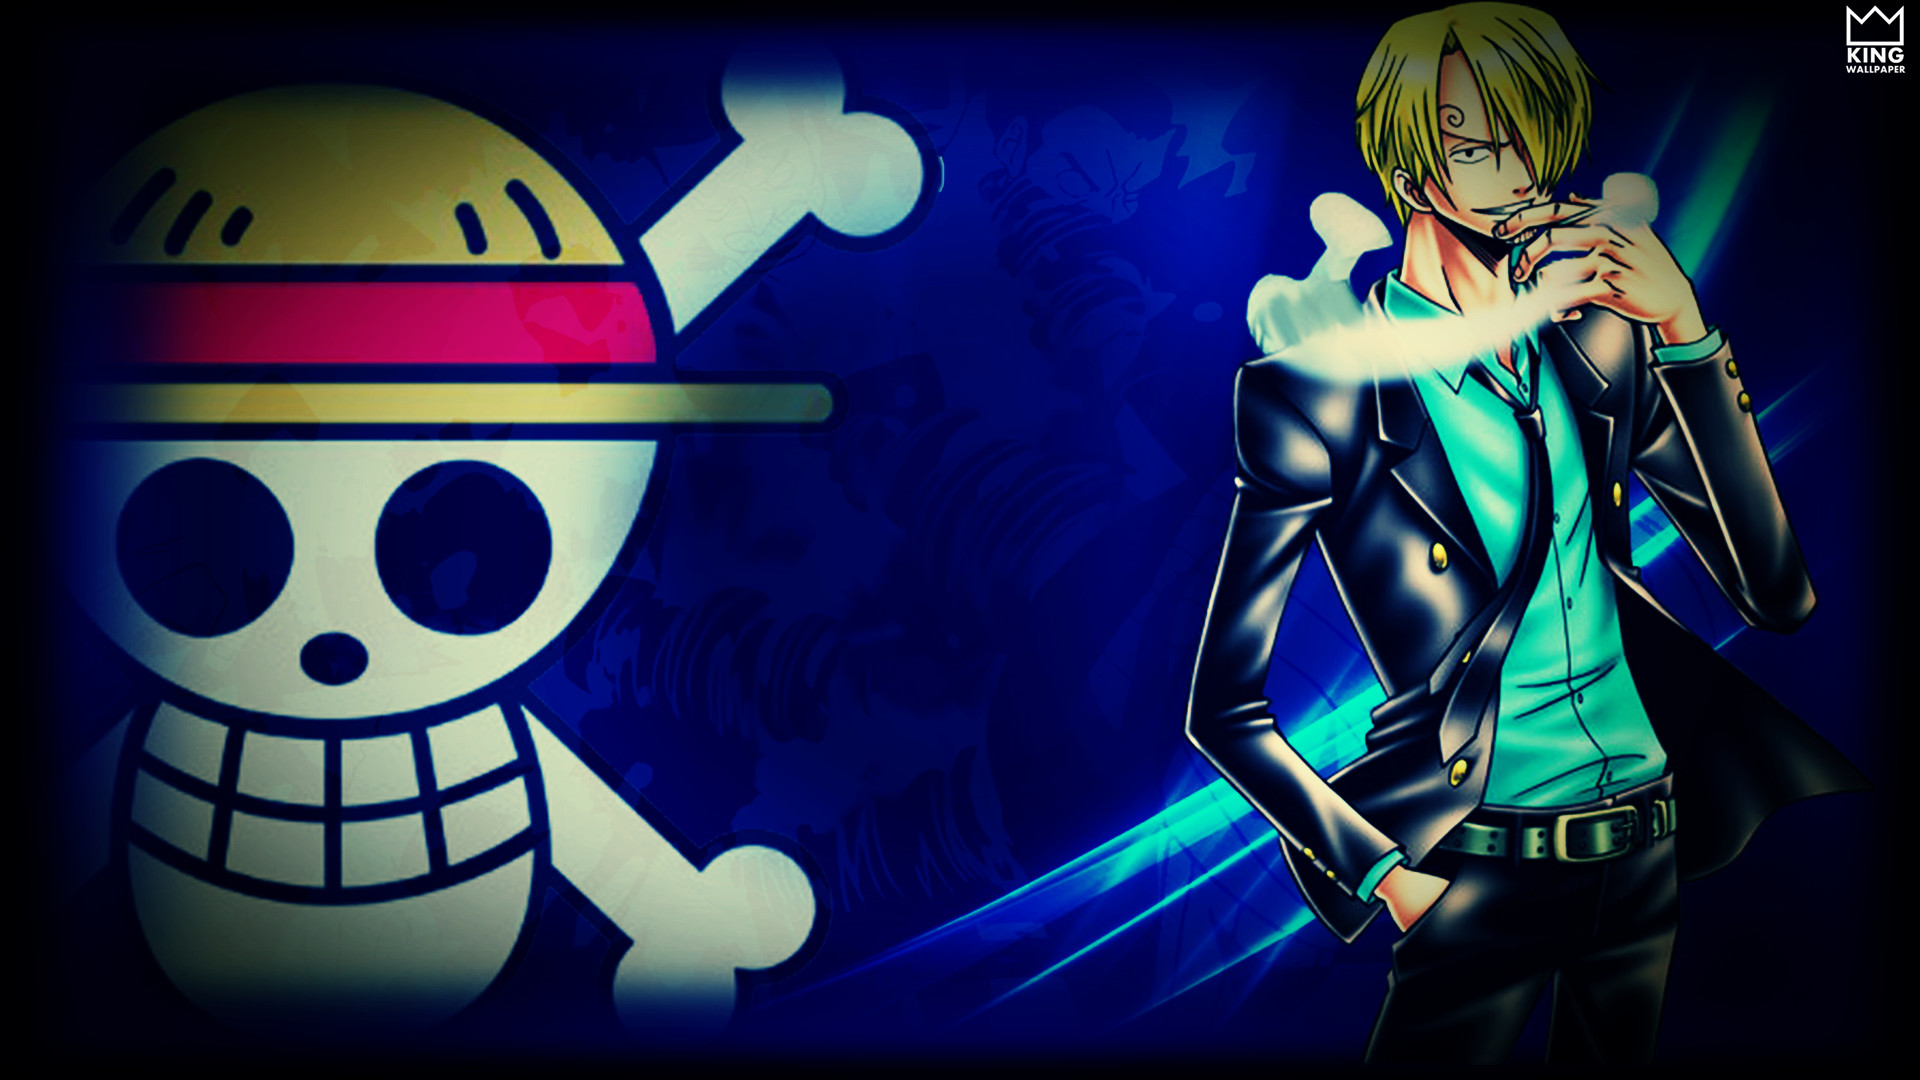 1920x1080 One PIece Saji Cool Wallpapers 10597 - HD Wallpapers Site